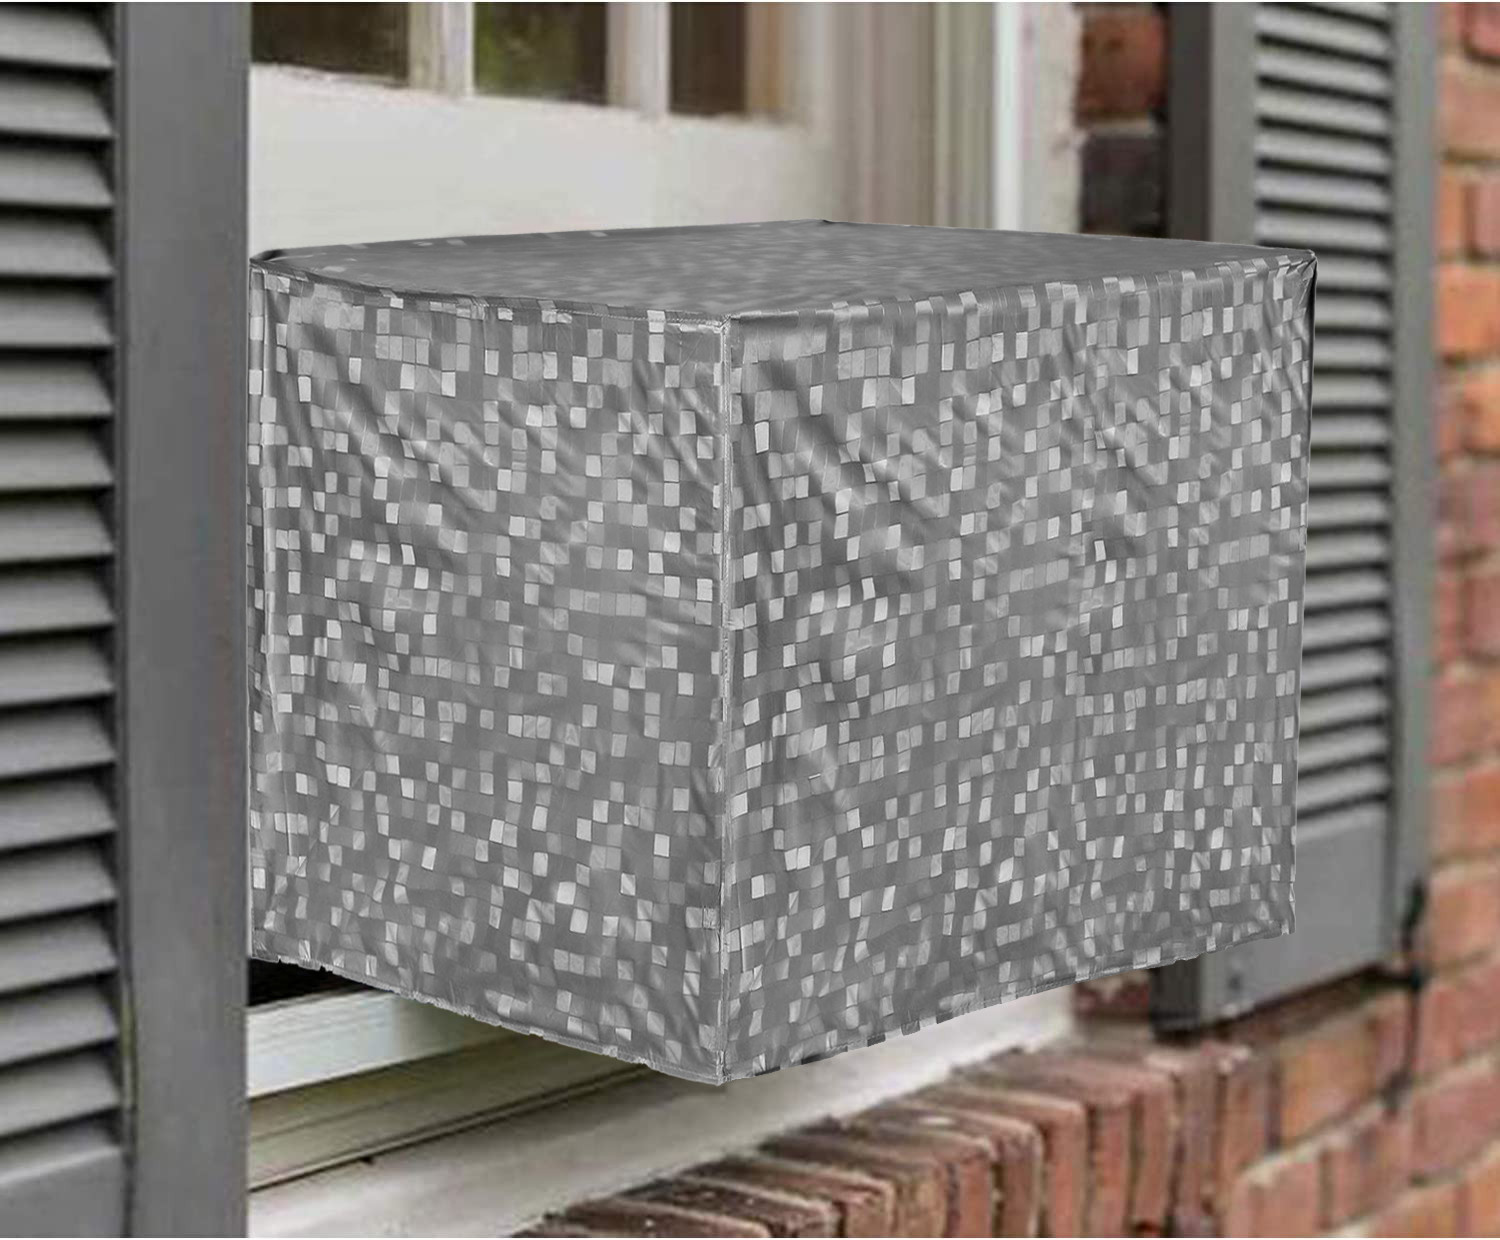 Kuber Industries PVC Check Print Dustproof Window A/C Cover For Outdoor For 1.5 Ton (Grey) 54KM3901